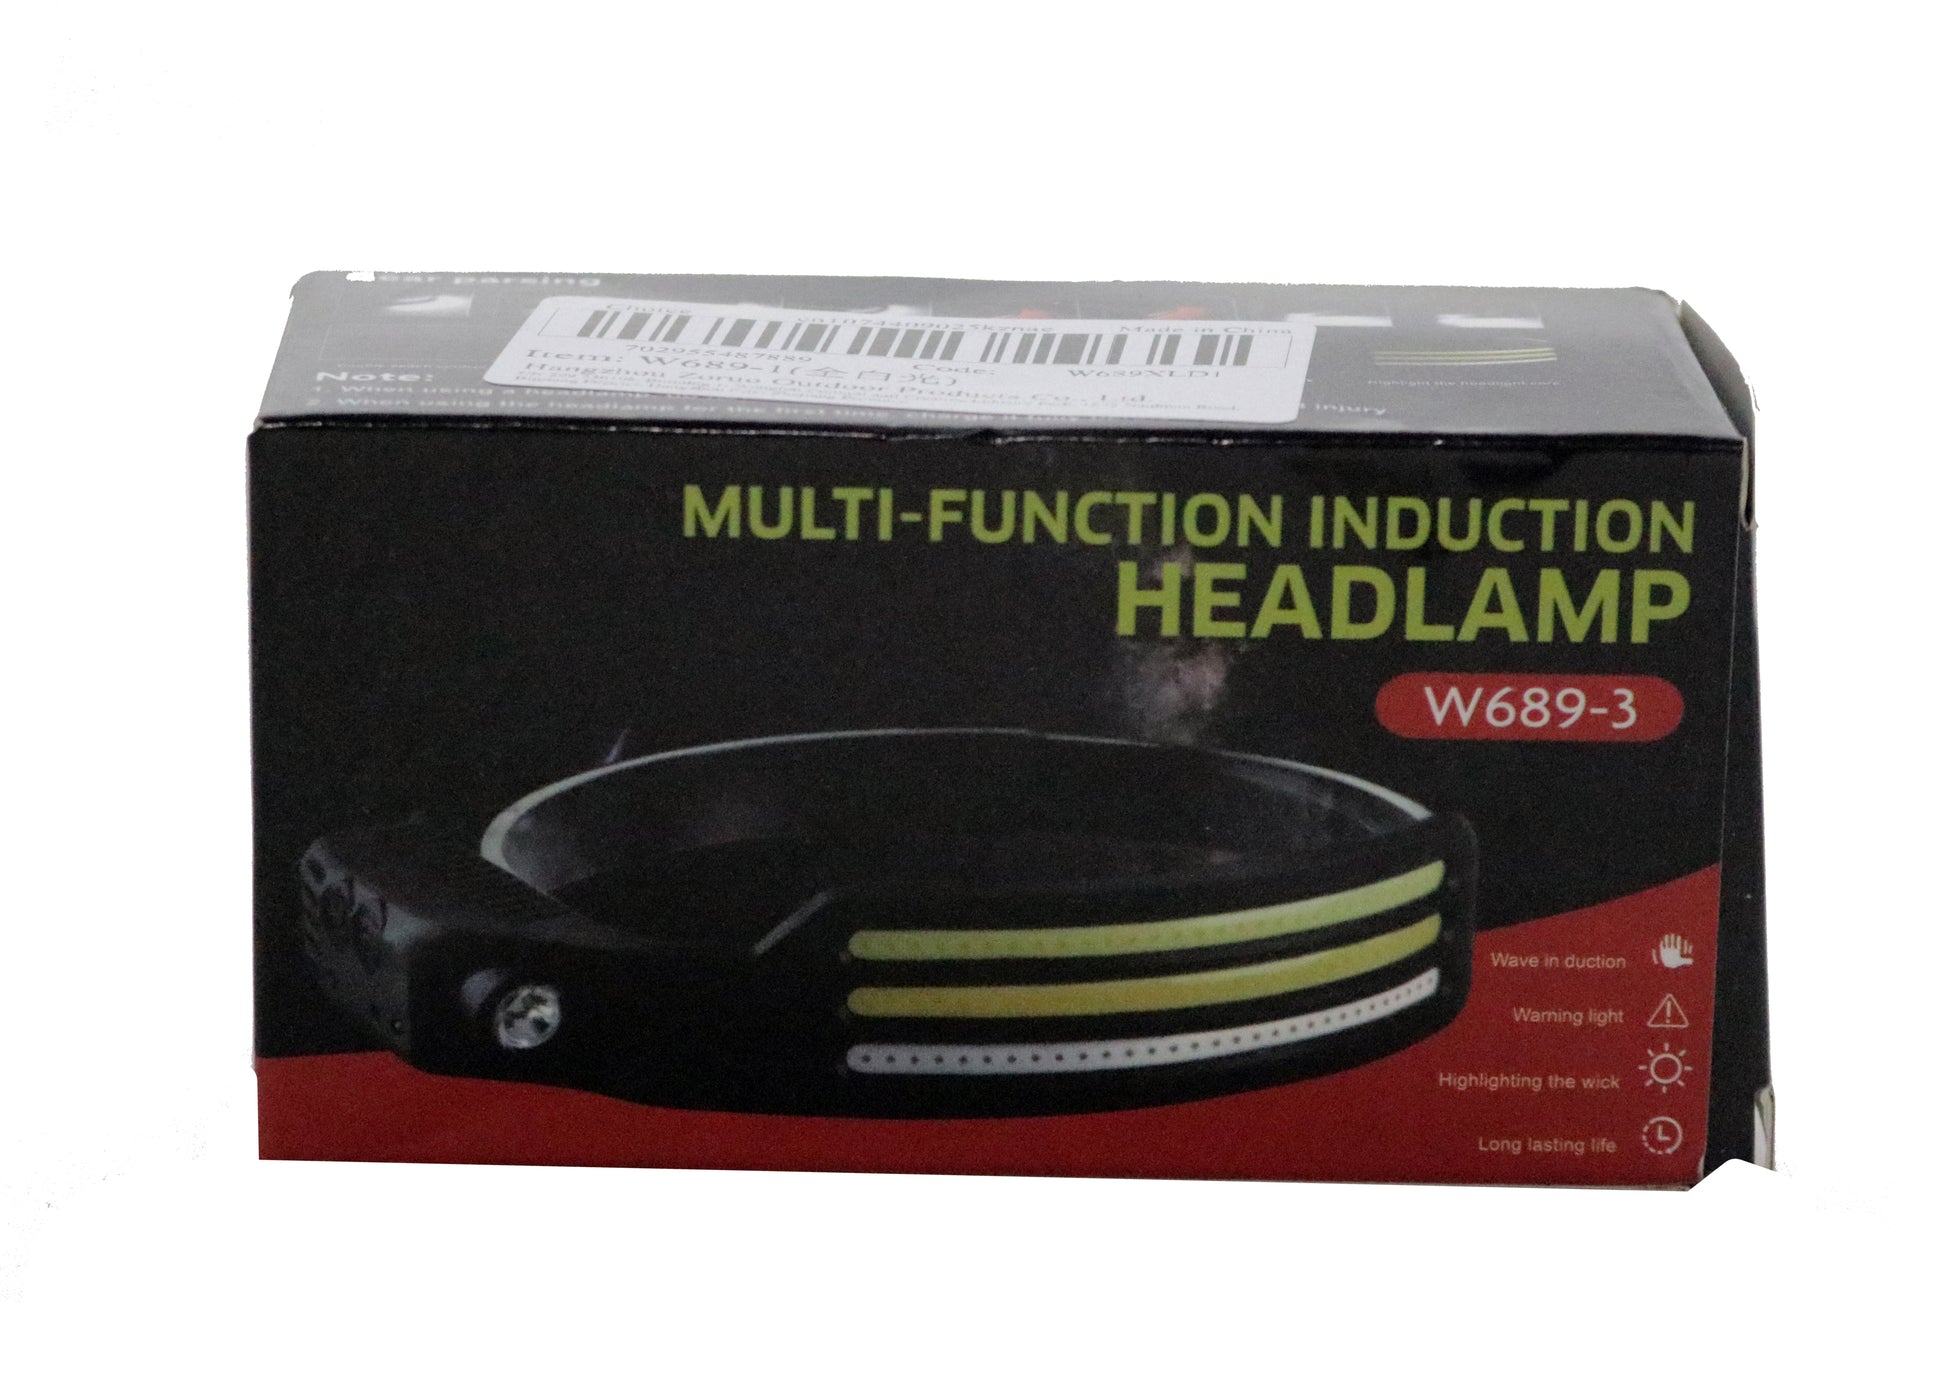 COB LED Sensor Headlamp | USB Rechargeable, Built-in Battery | 5 Lighting Modes, Induction Head Torch